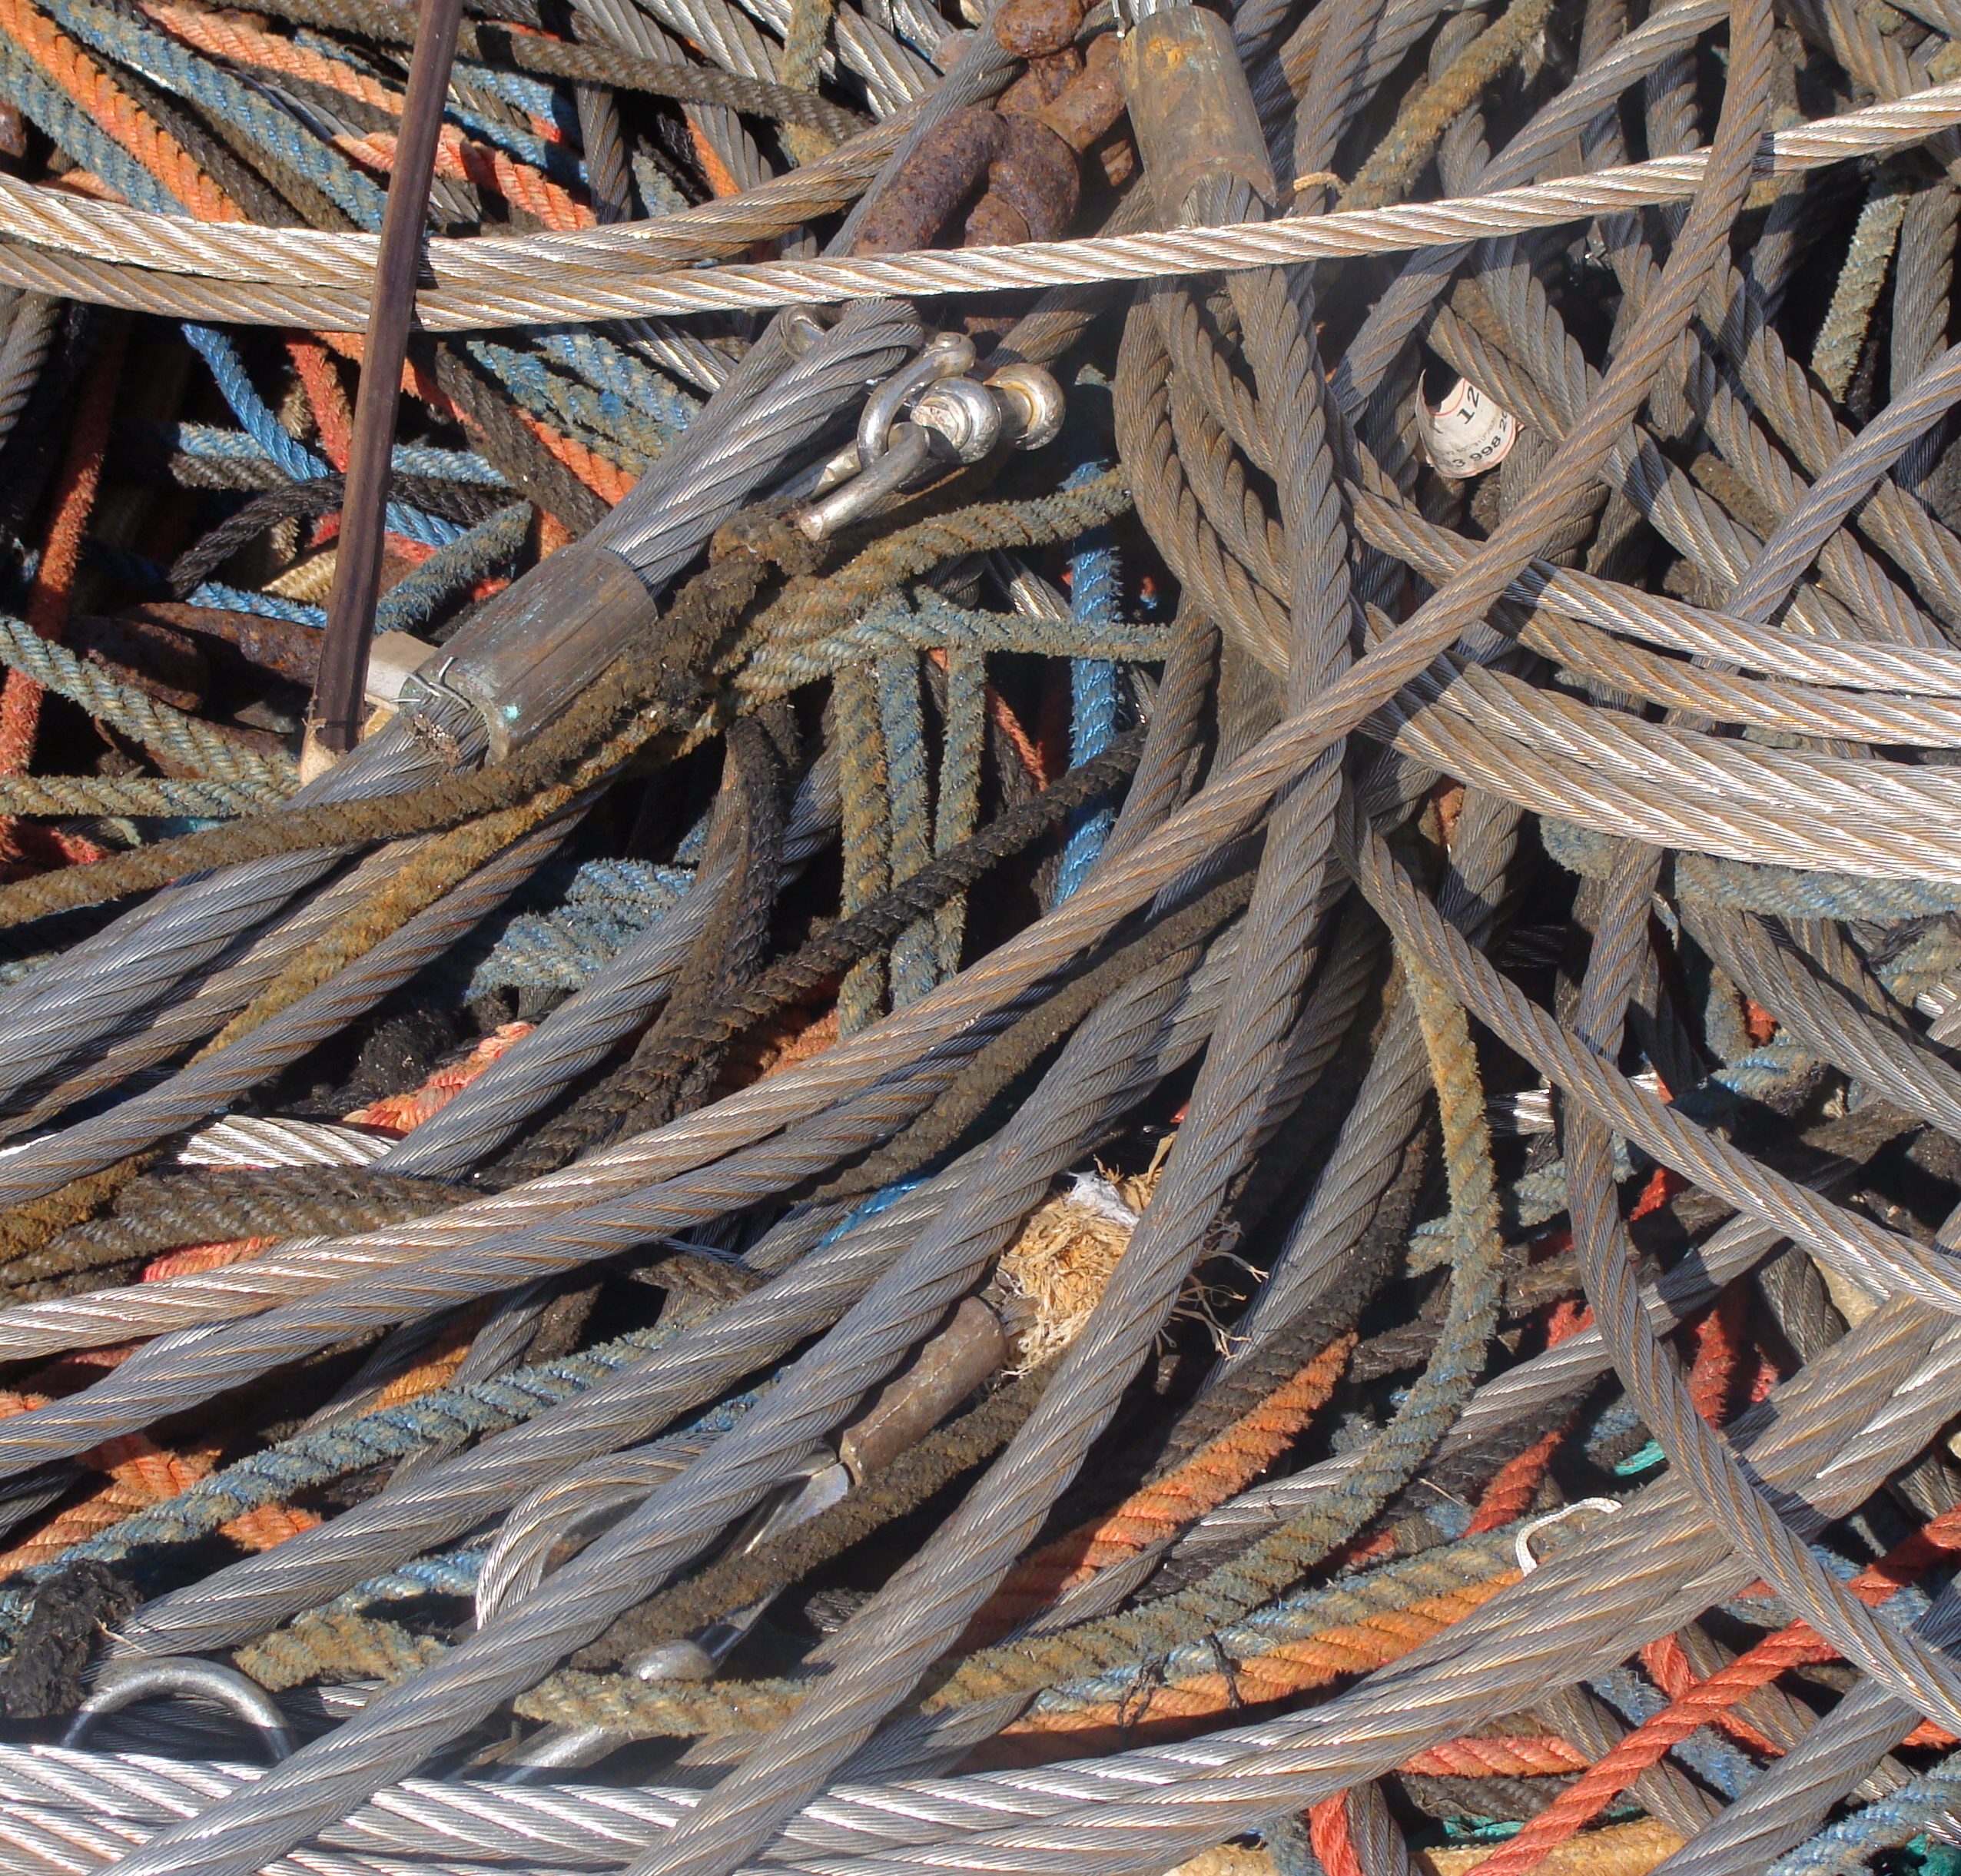 Bin of fishing cables